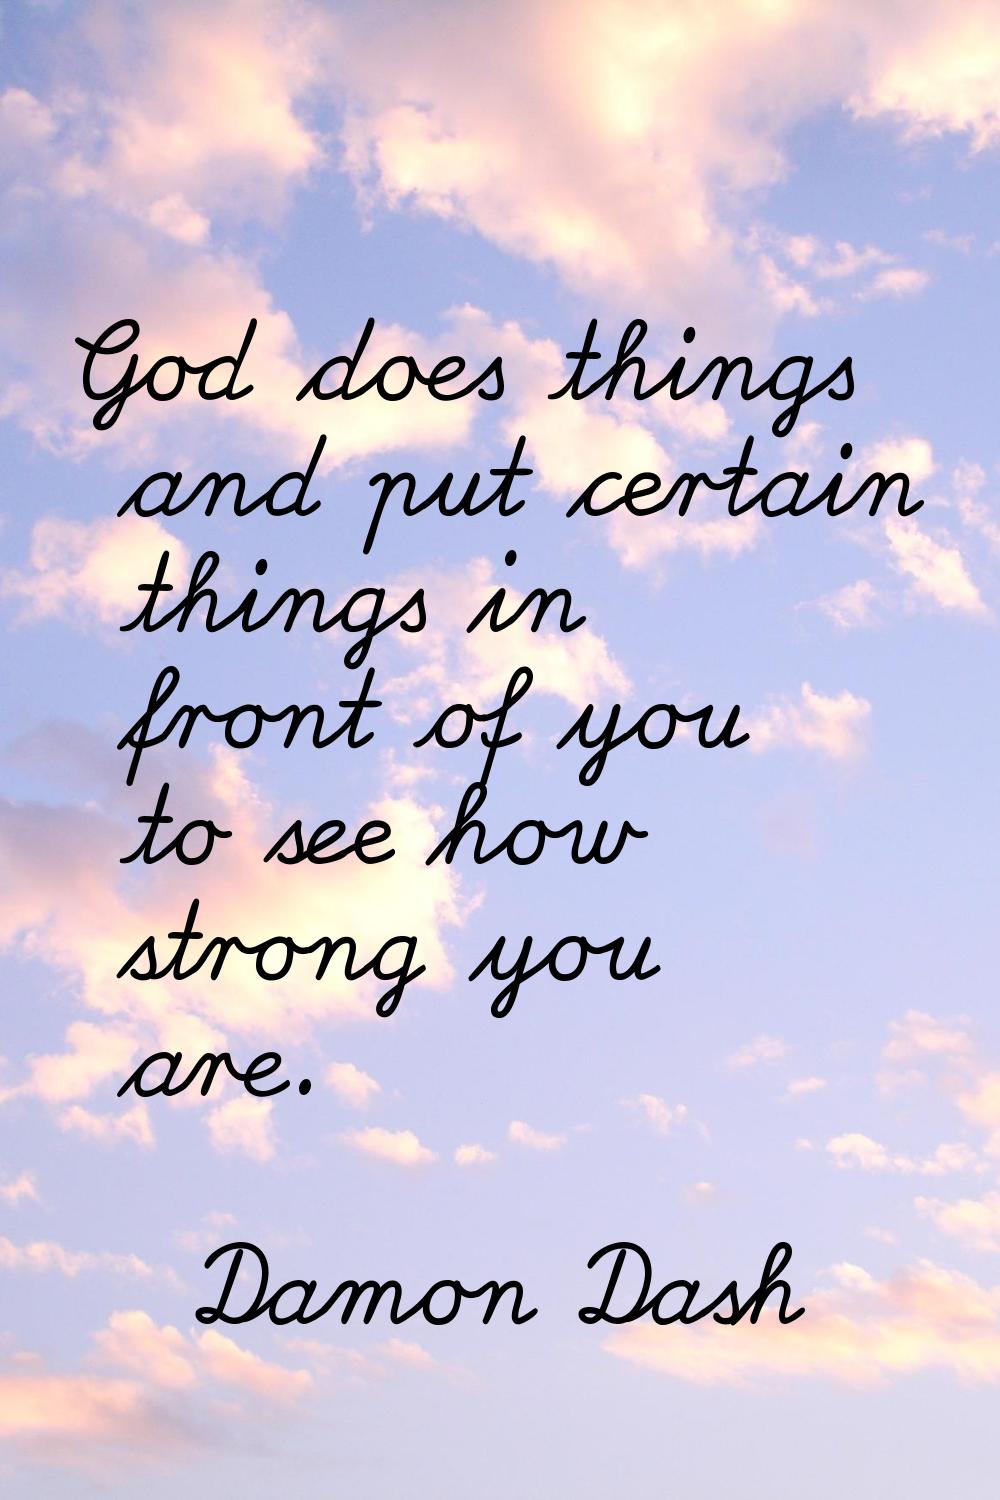 God does things and put certain things in front of you to see how strong you are.